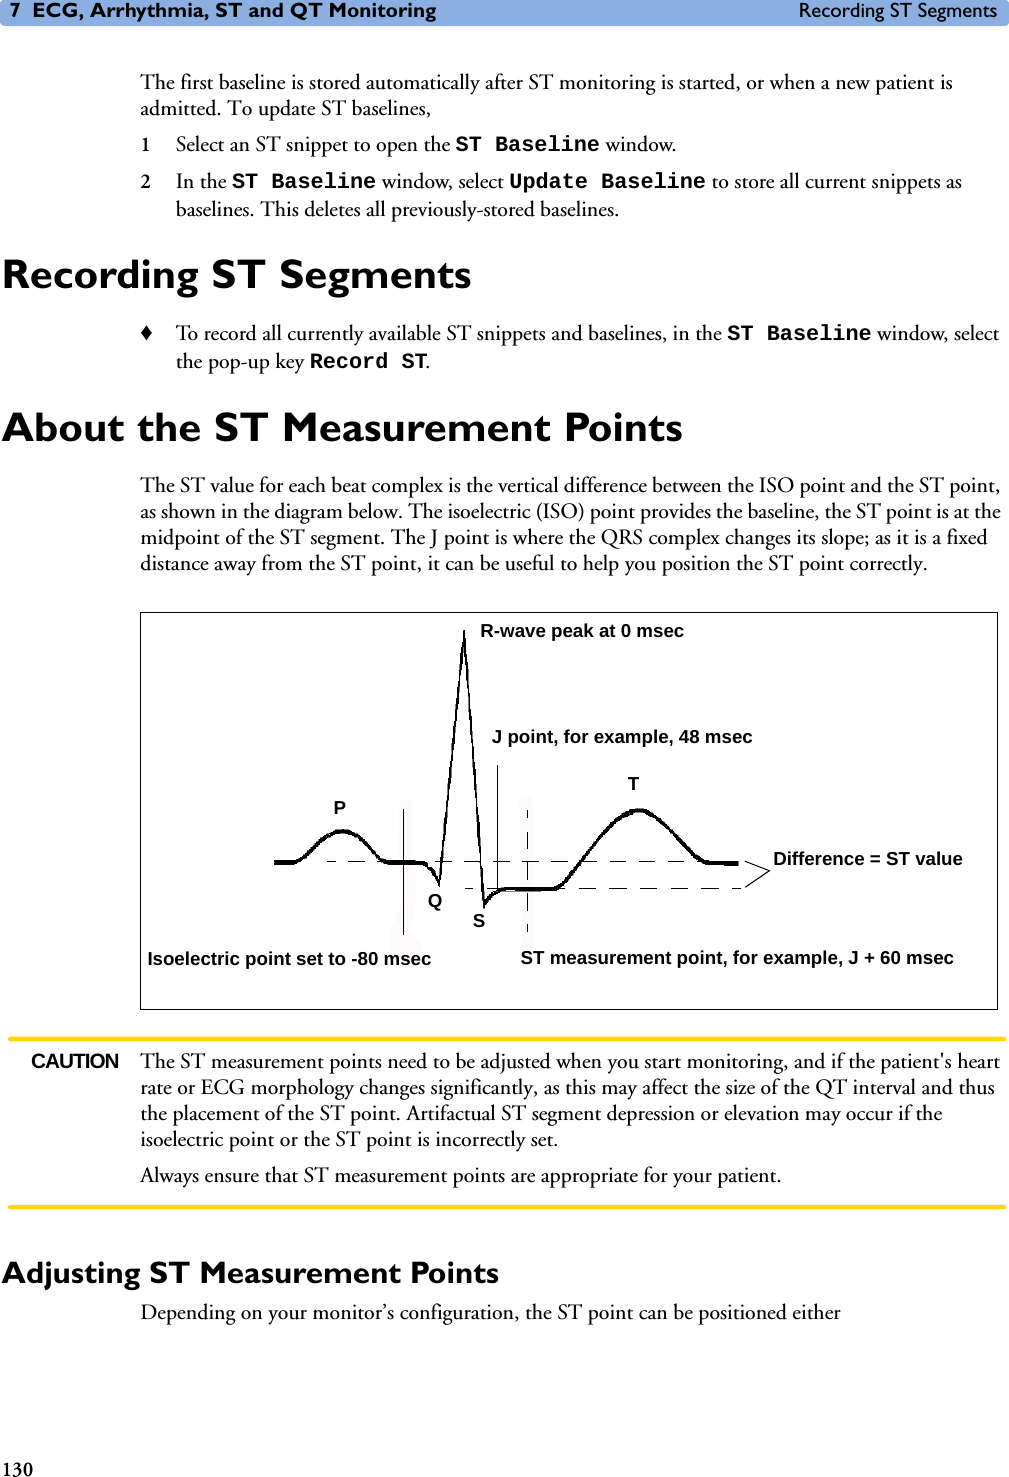 7 ECG, Arrhythmia, ST and QT Monitoring Recording ST Segments130The first baseline is stored automatically after ST monitoring is started, or when a new patient is admitted. To update ST baselines,1Select an ST snippet to open the ST Baseline window. 2In the ST Baseline window, select Update Baseline to store all current snippets as baselines. This deletes all previously-stored baselines.Recording ST Segments♦To record all currently available ST snippets and baselines, in the ST Baseline window, select the pop-up key Record ST. About the ST Measurement PointsThe ST value for each beat complex is the vertical difference between the ISO point and the ST point, as shown in the diagram below. The isoelectric (ISO) point provides the baseline, the ST point is at the midpoint of the ST segment. The J point is where the QRS complex changes its slope; as it is a fixed distance away from the ST point, it can be useful to help you position the ST point correctly. CAUTION The ST measurement points need to be adjusted when you start monitoring, and if the patient&apos;s heart rate or ECG morphology changes significantly, as this may affect the size of the QT interval and thus the placement of the ST point. Artifactual ST segment depression or elevation may occur if the isoelectric point or the ST point is incorrectly set. Always ensure that ST measurement points are appropriate for your patient.Adjusting ST Measurement PointsDepending on your monitor’s configuration, the ST point can be positioned either J point, for example, 48 msecR-wave peak at 0 msecIsoelectric point set to -80 msecDifference = ST valueST measurement point, for example, J + 60 msecTPQS